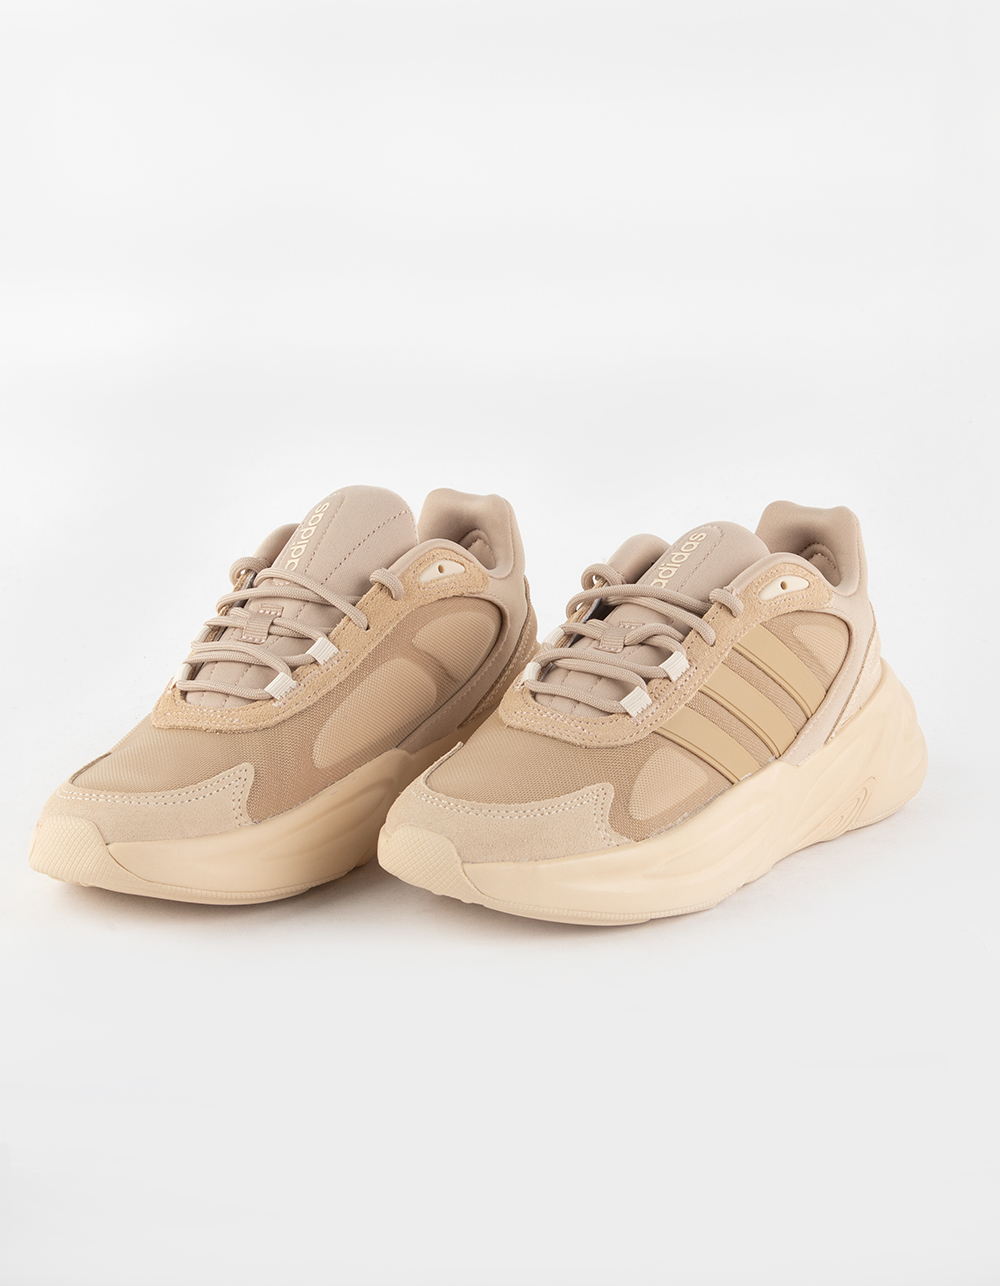 ADIDAS Ozelle Womens Shoes - BEIGE